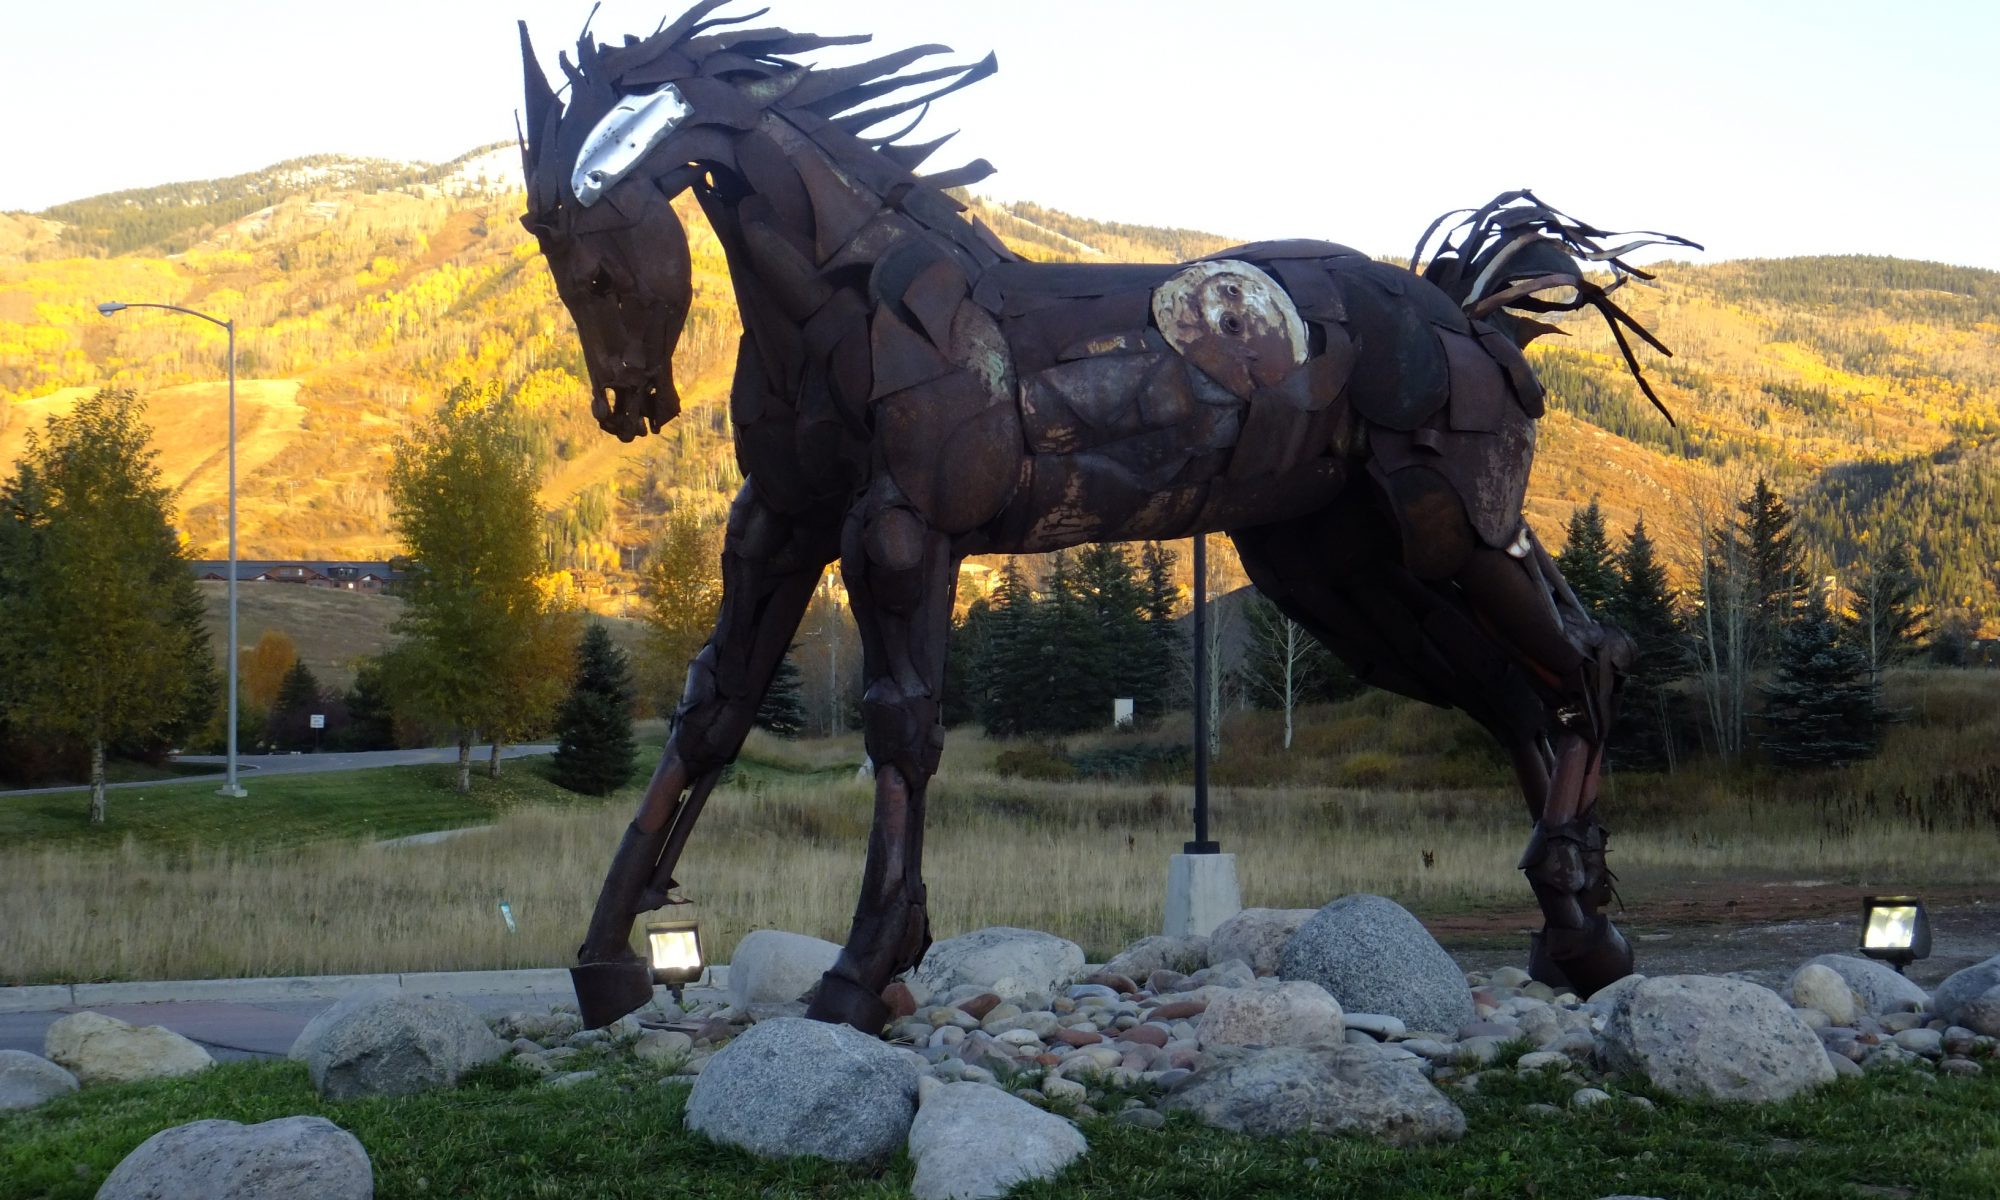 Horse sculpture in Routt County shows balance of ag and resort industry